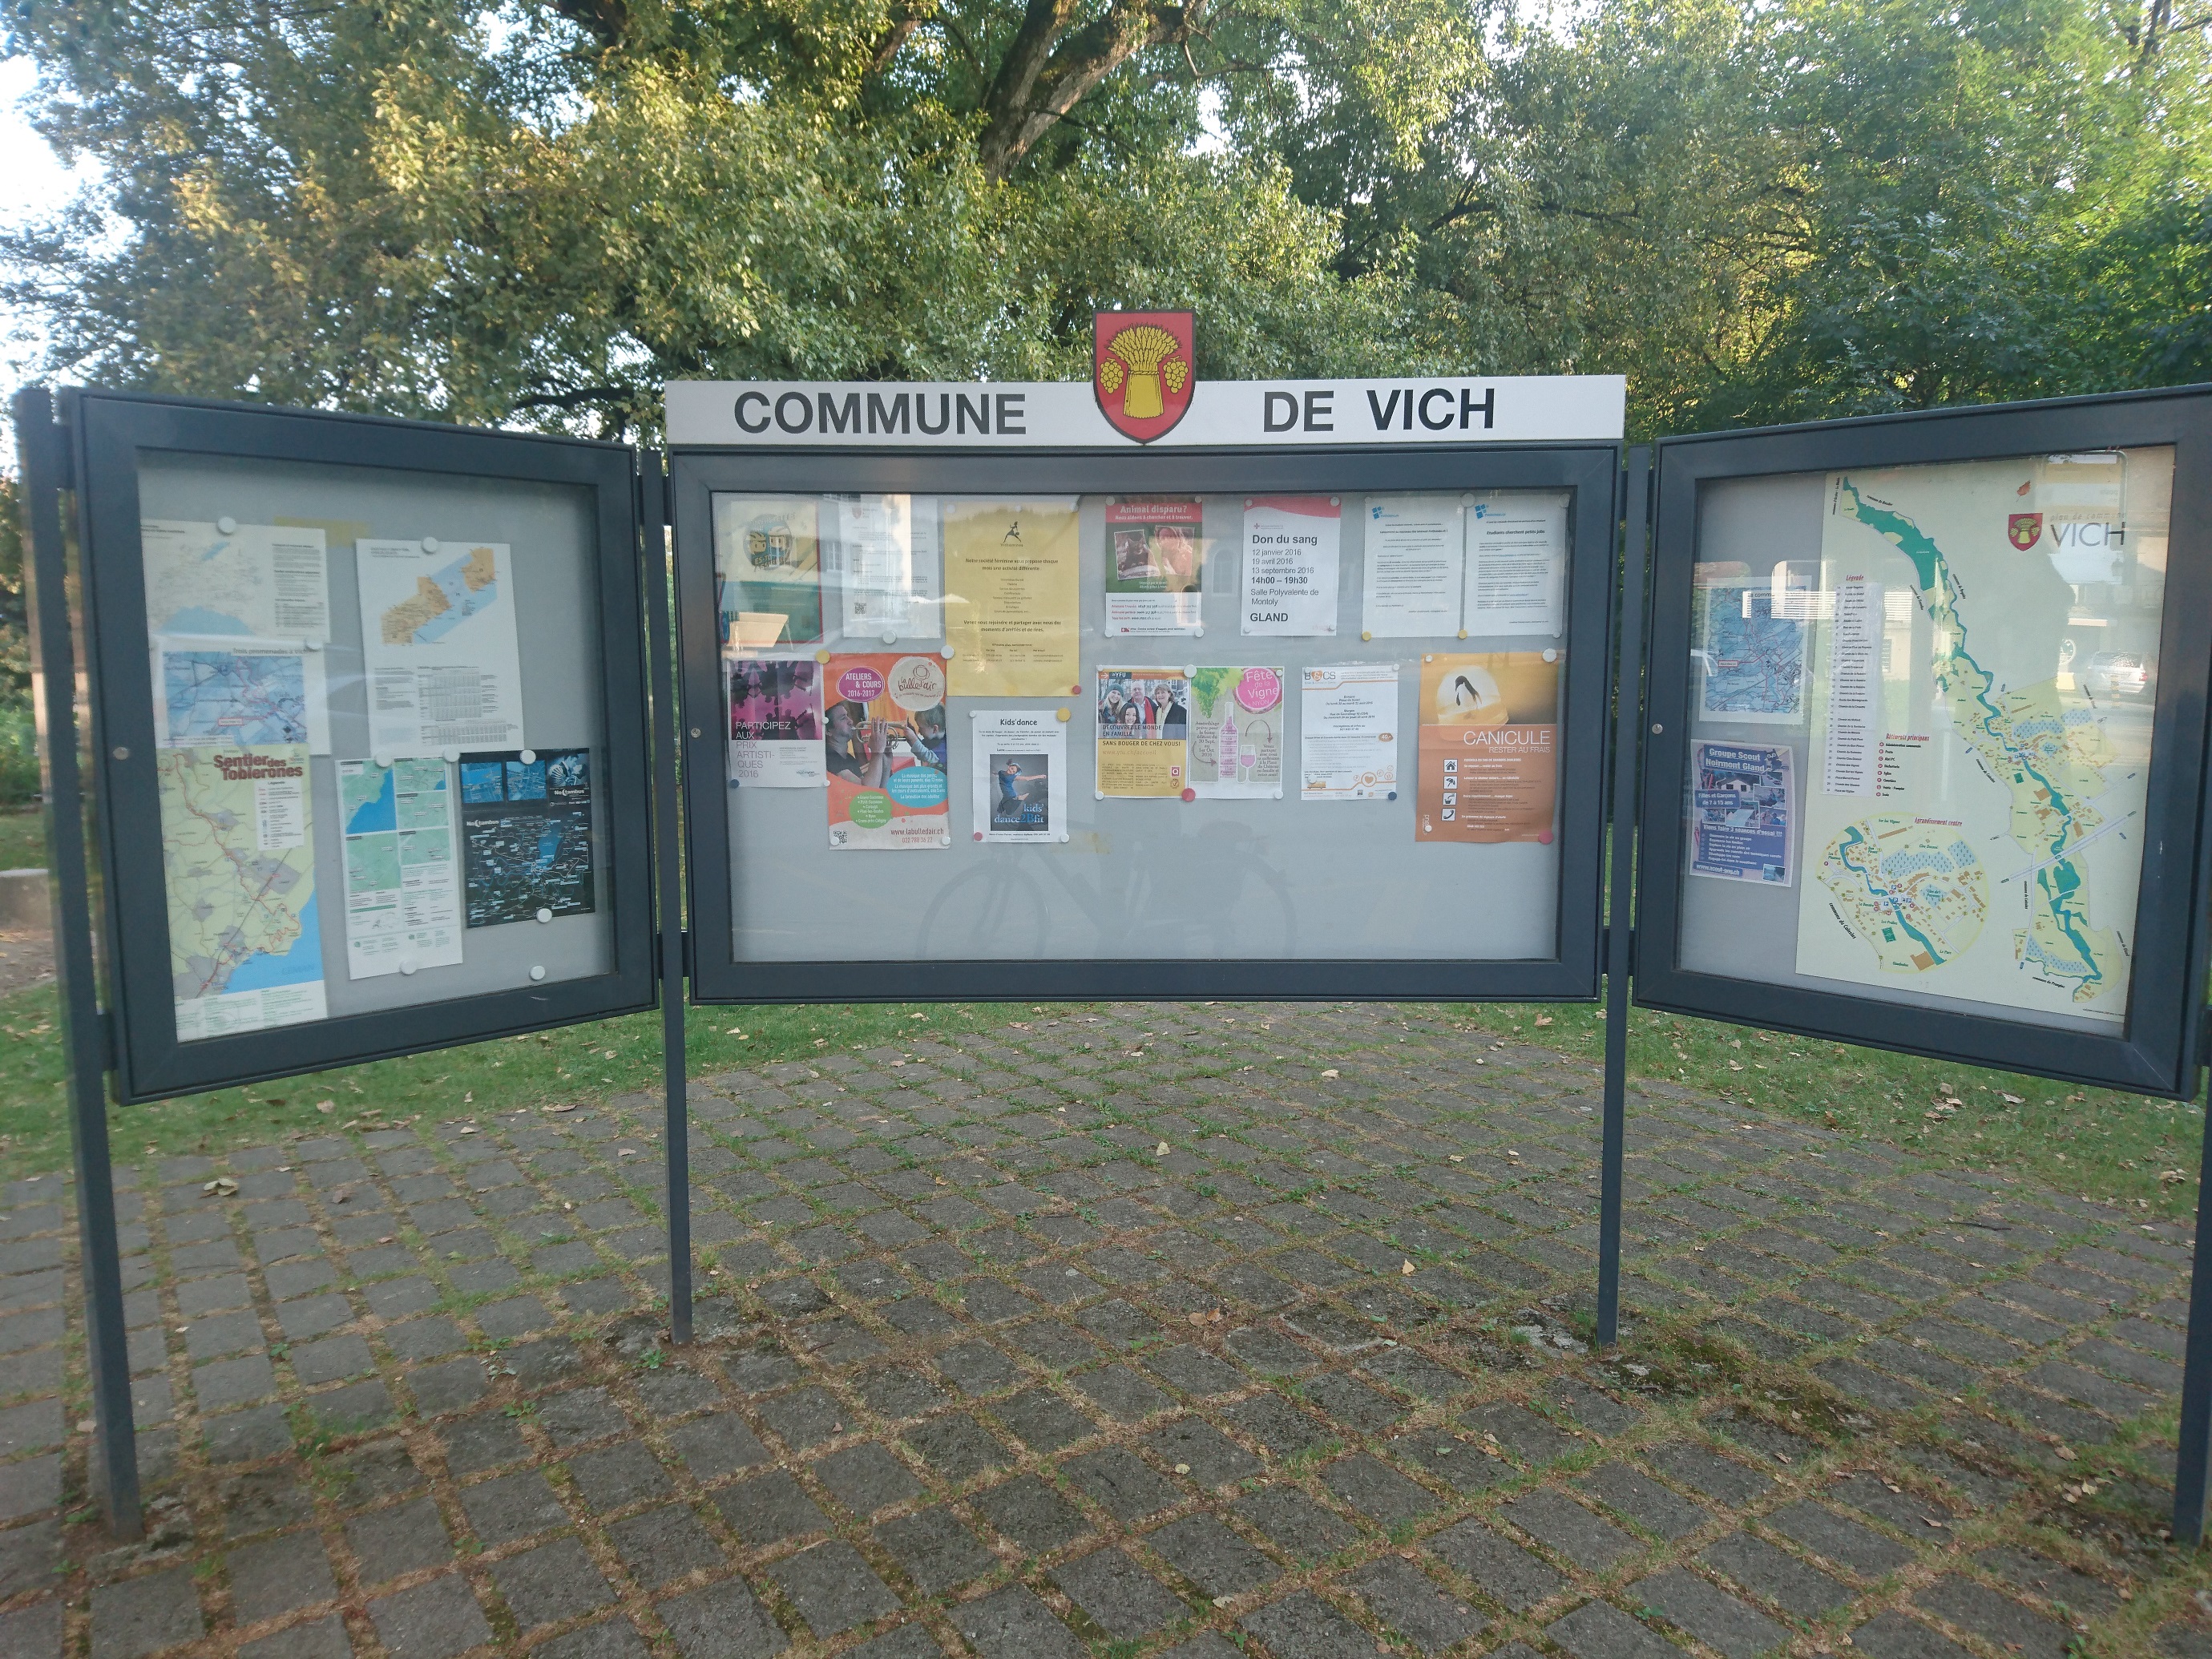 Photo of the communal noticeboard in the Vaudois village of Vich